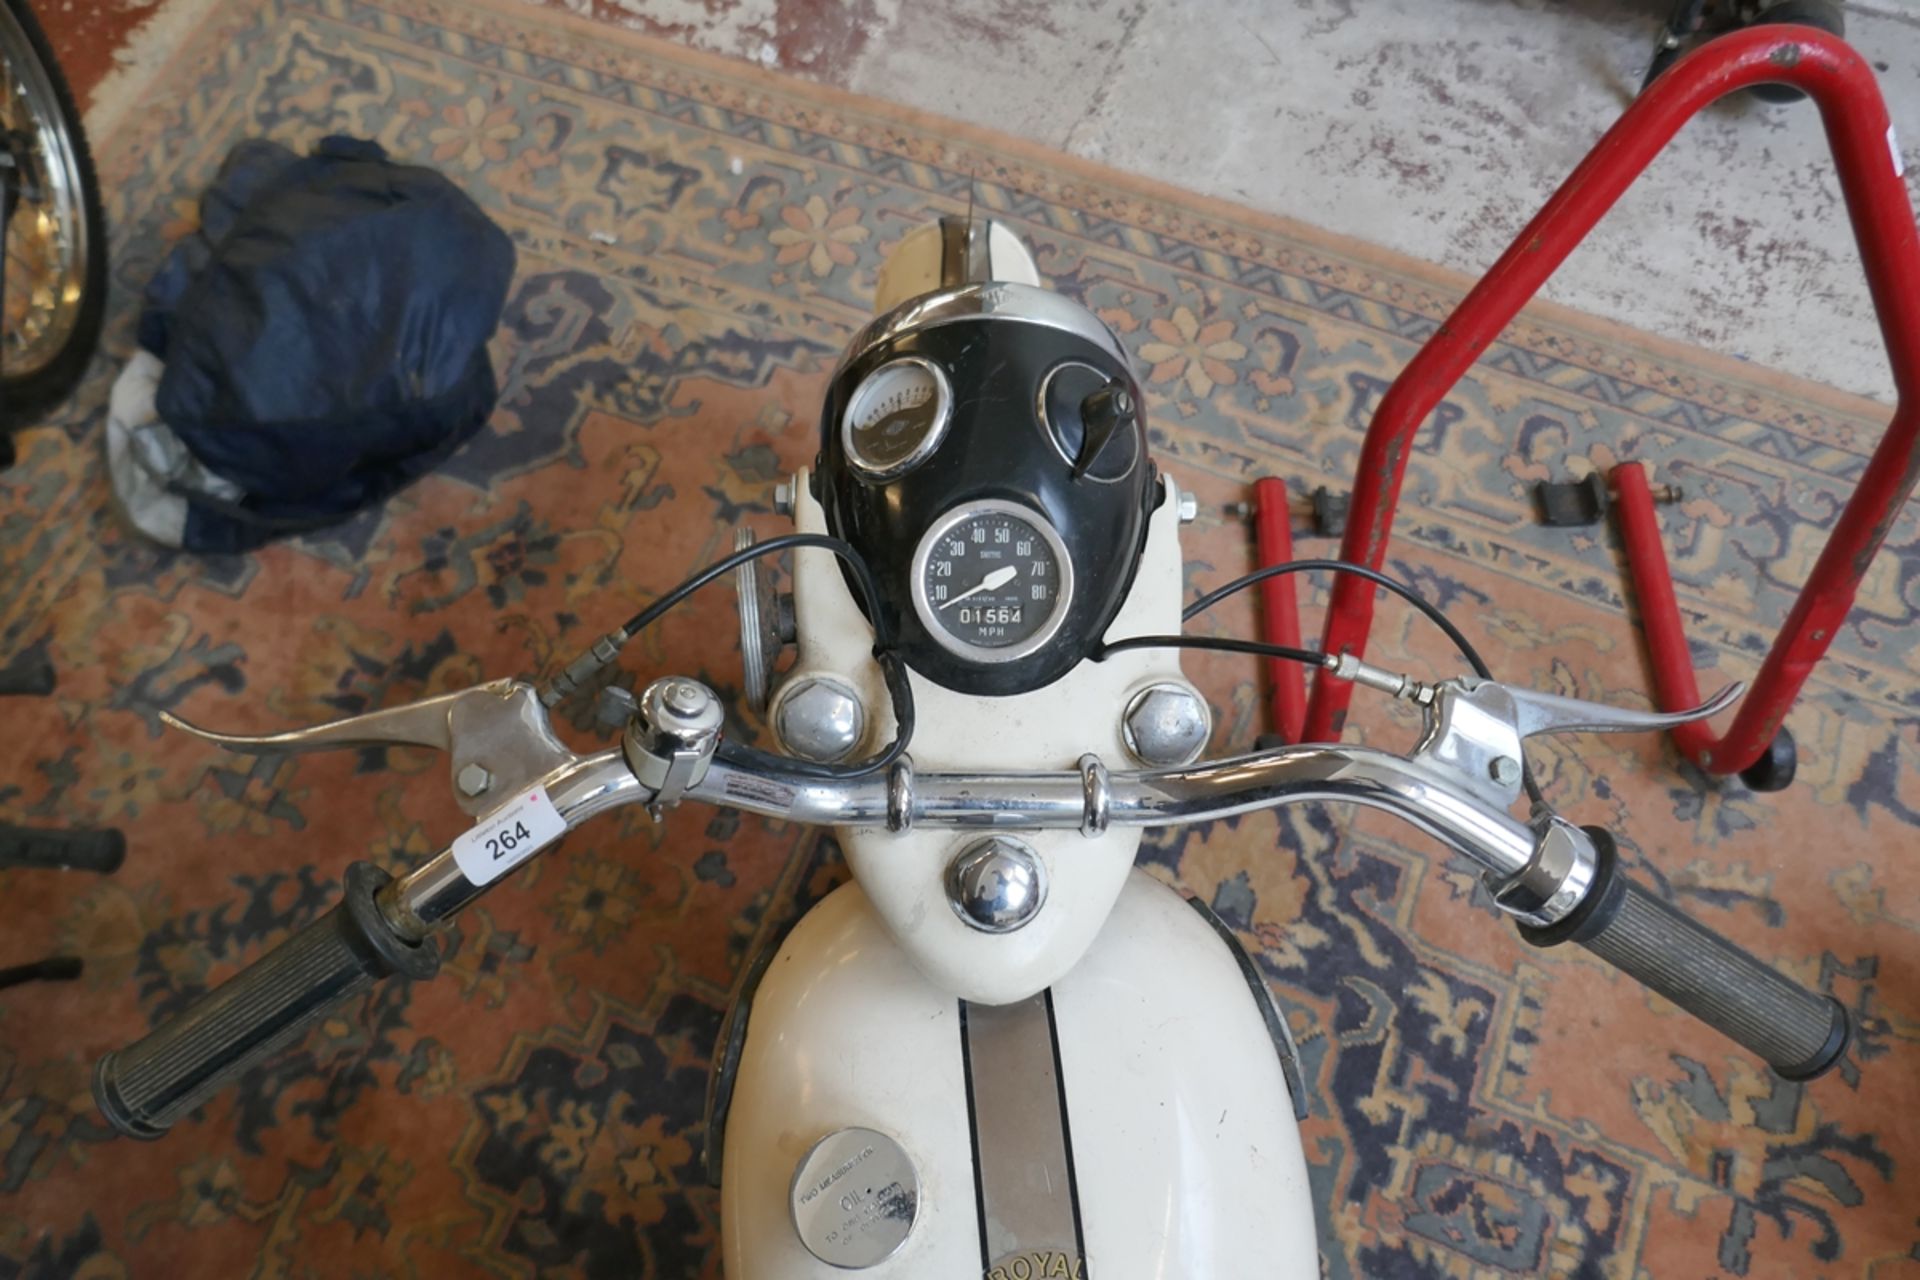 1961 Royal Enfield Prince 150cc with just 1600 miles from new - Image 10 of 35